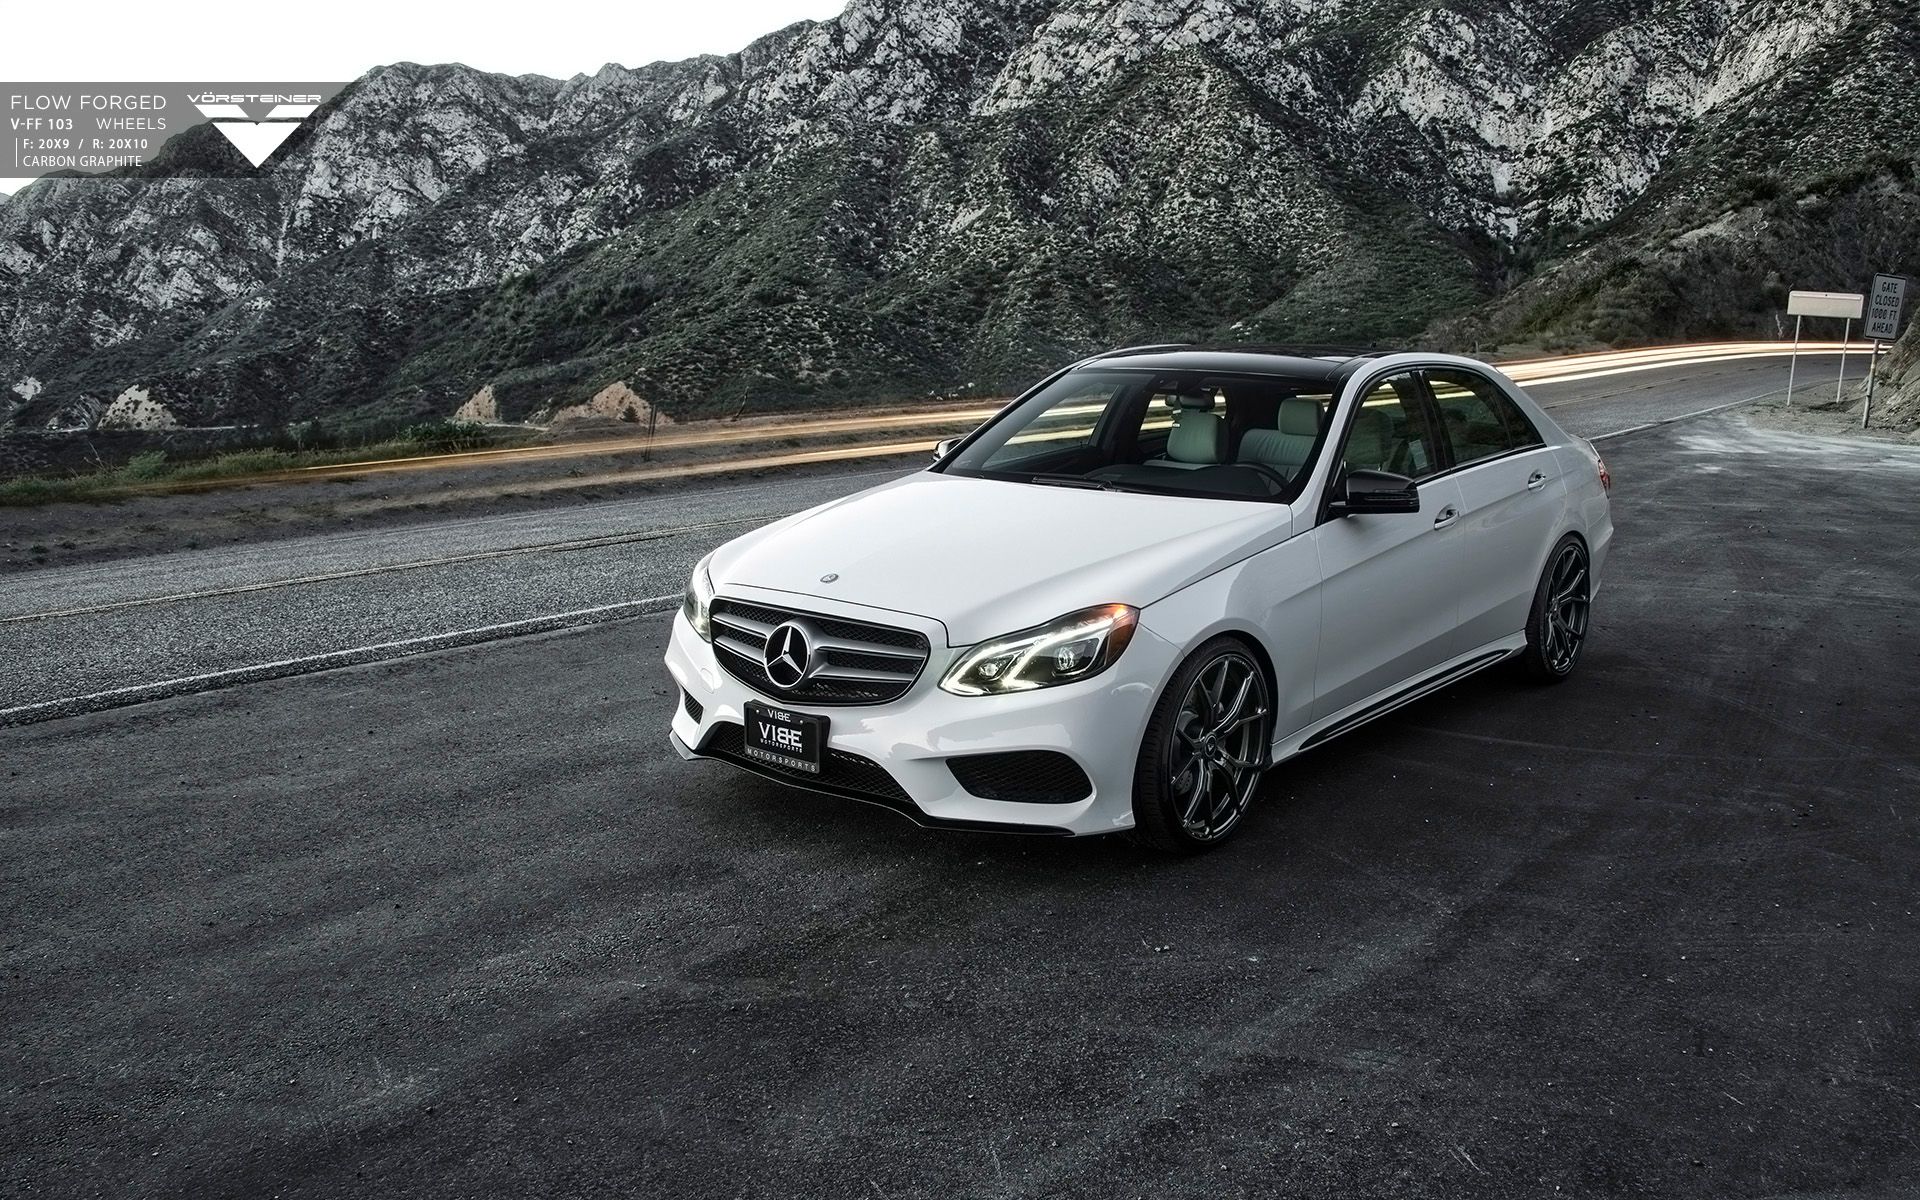 Mercedes-Benz E-Class Wallpapers | Full HD Pictures